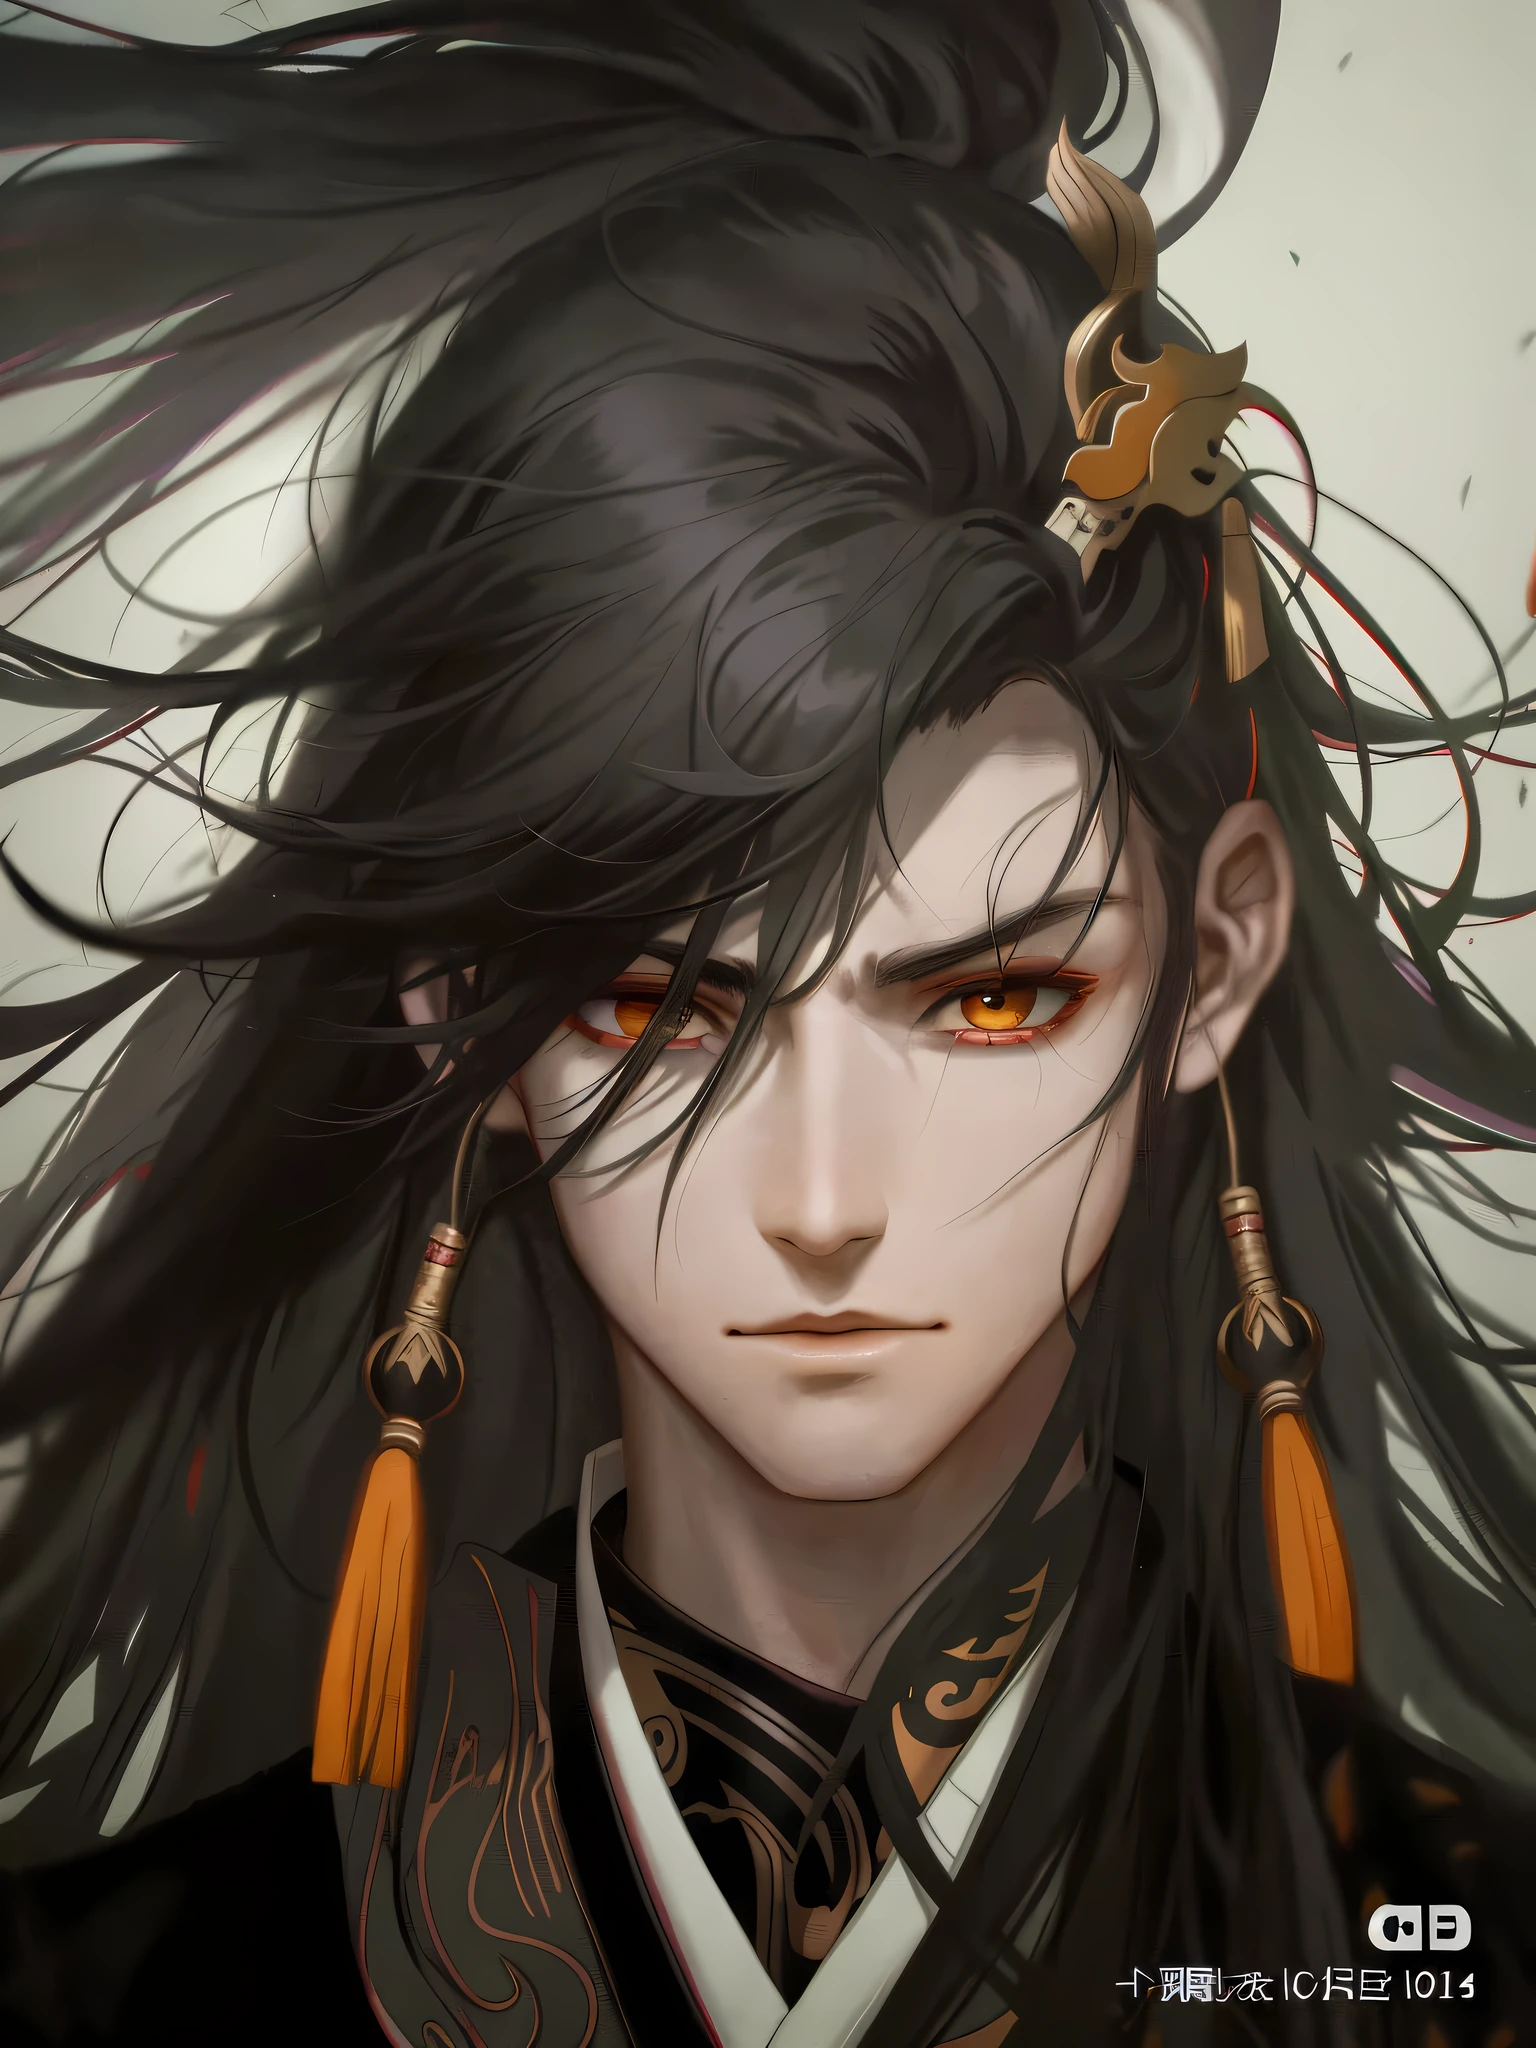 Anime characters with long black hair and white shirt, Kurase Jinyao, flowing hair and robes, anime tribal boy with long hair, handsome guy in demon killer art, by Yang J, Bian Lian, G Lingering Art Style, Zhao Yun, Onmyoji portrait, inspired by Yang Jin, brunette mage, beautiful androgynous prince, beautiful eyes, delicate facial features, flowing hair, hair portrayal